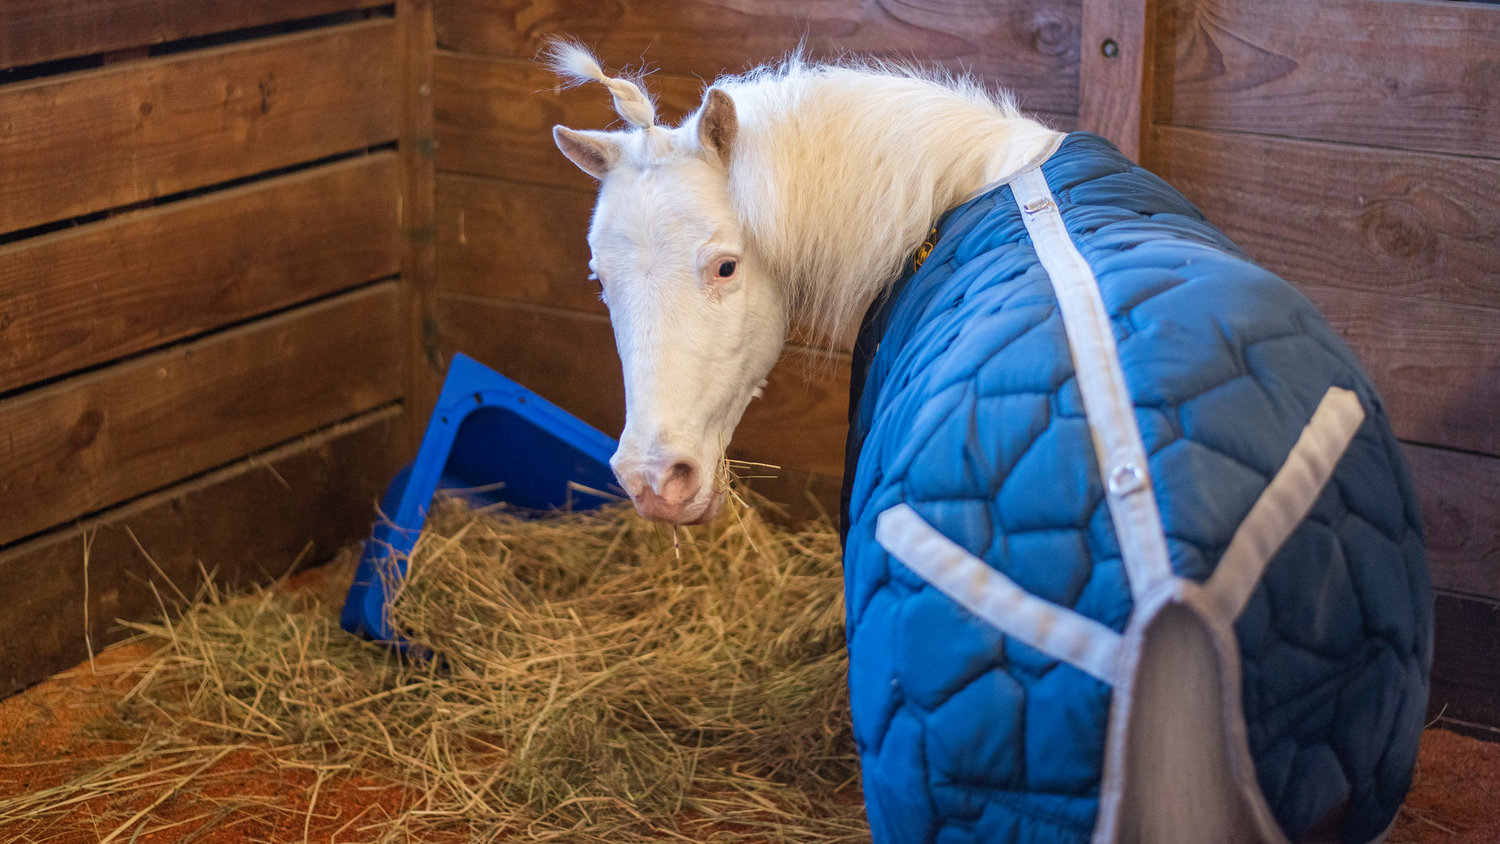 A “unicorn” looks towards the camera while enjoying a pile of hay during the Spring Youth Fair in Centralia on Saturday.